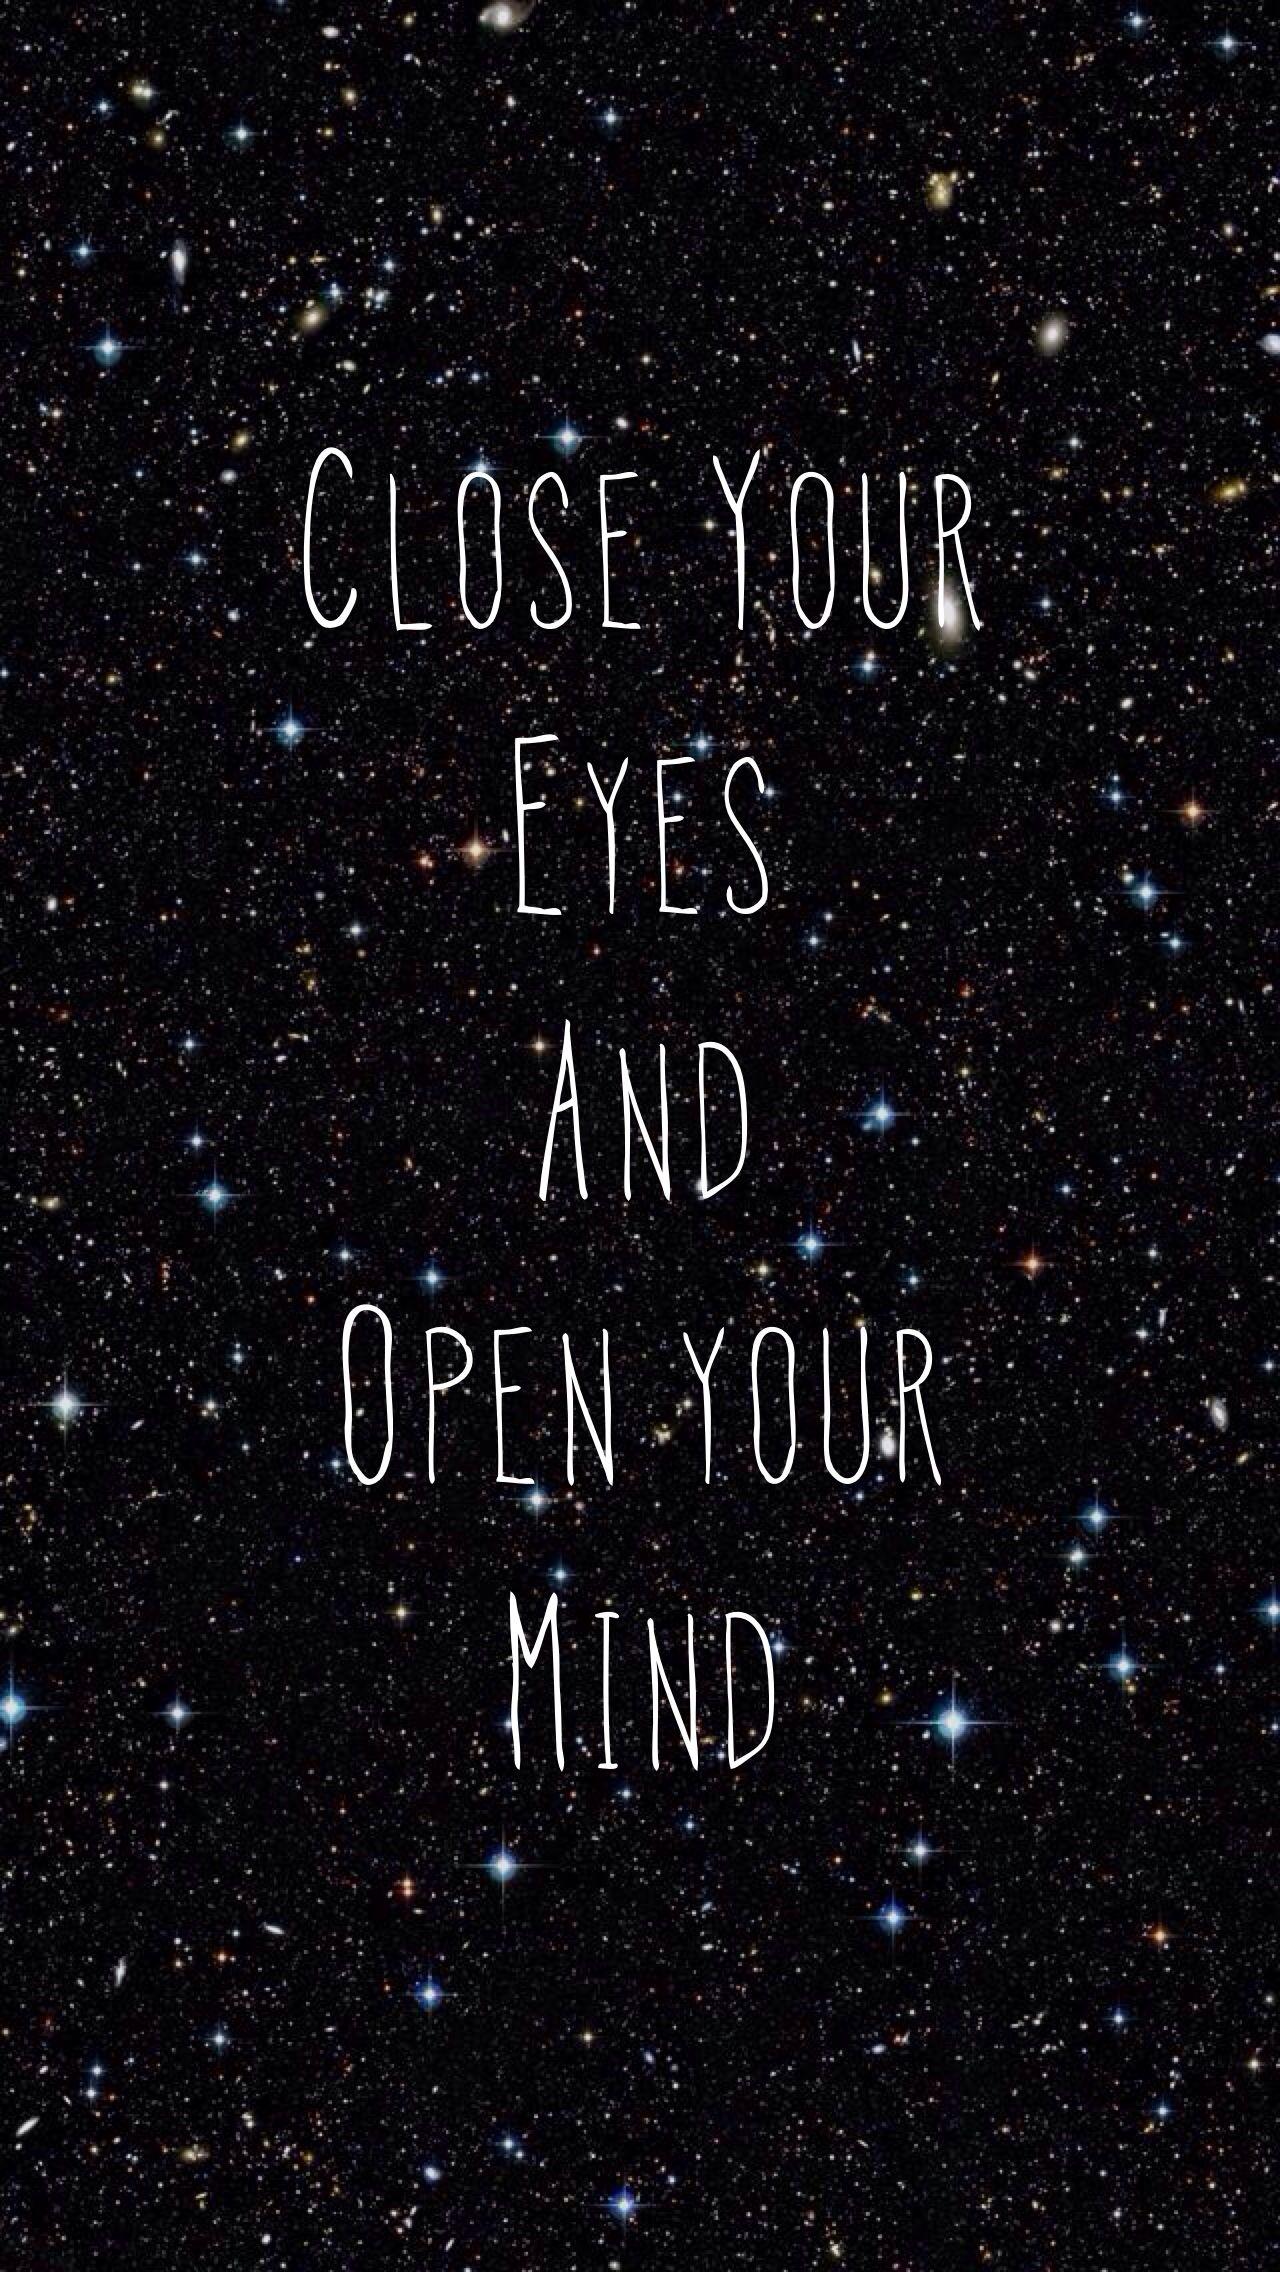 Open your mind. iPhone wallpaper quotes funny, Wallpaper quotes, Funny quotes